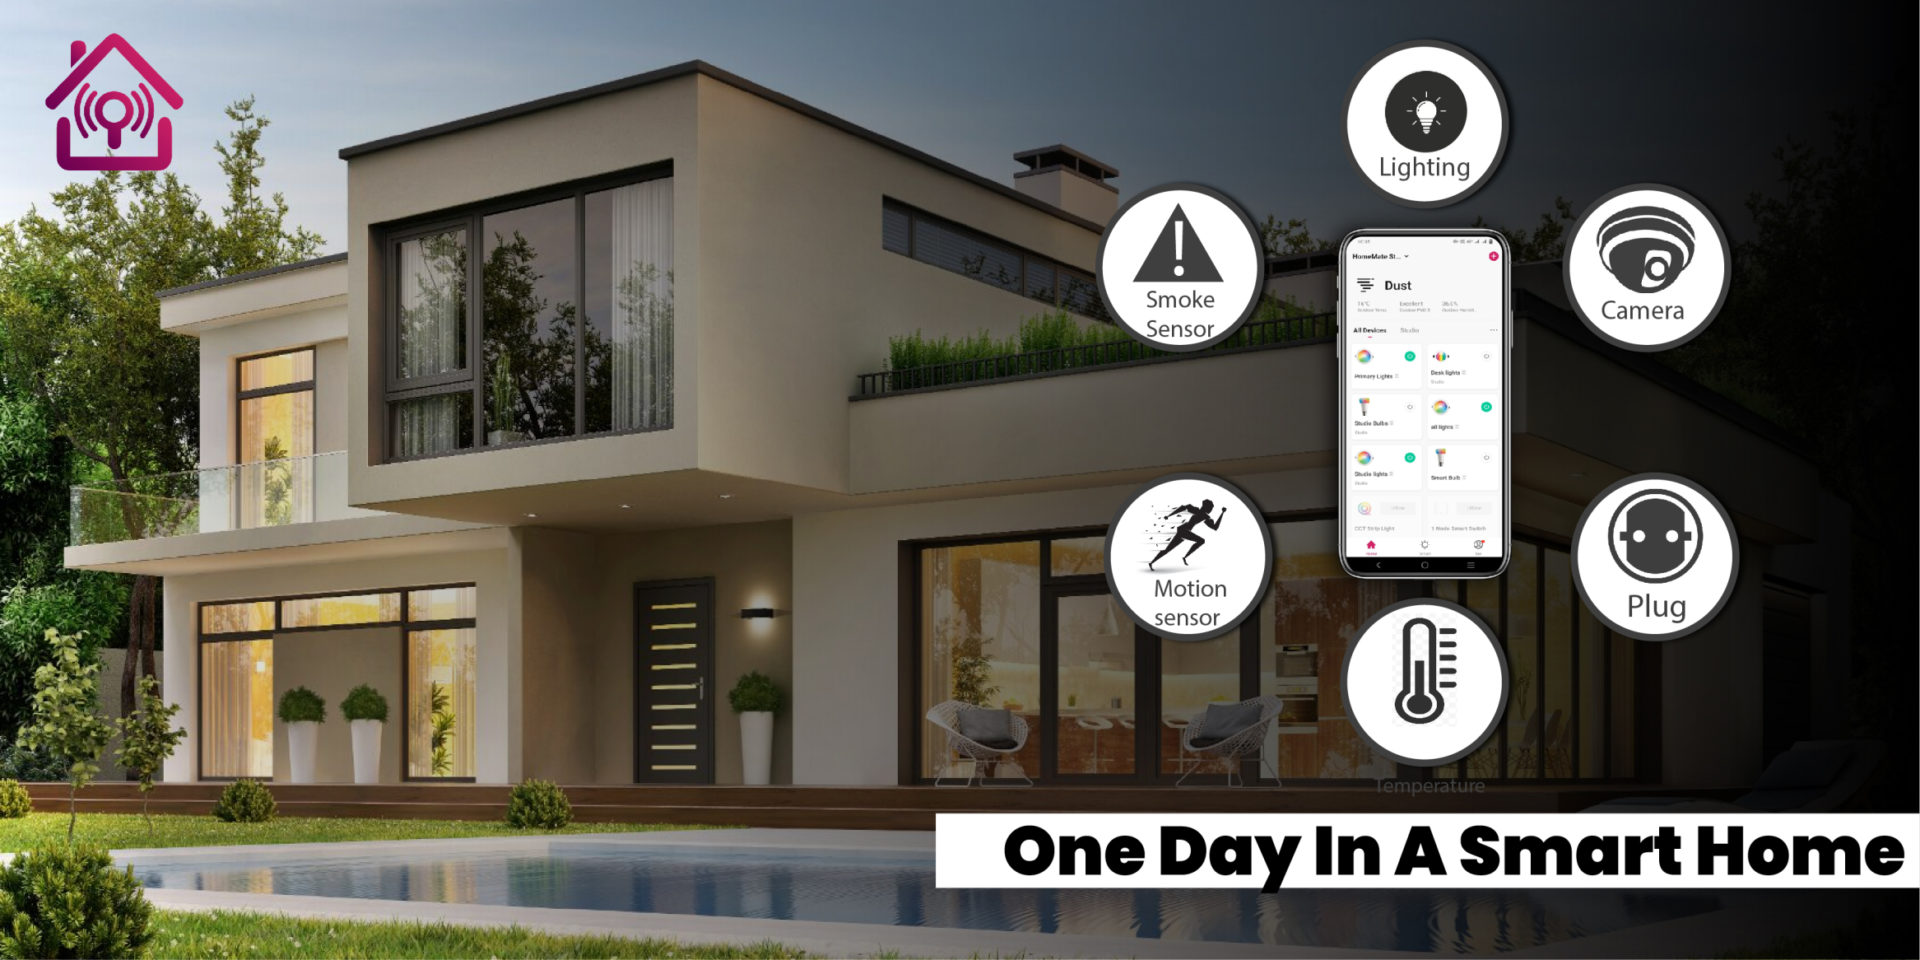 One Day In A Smart Home